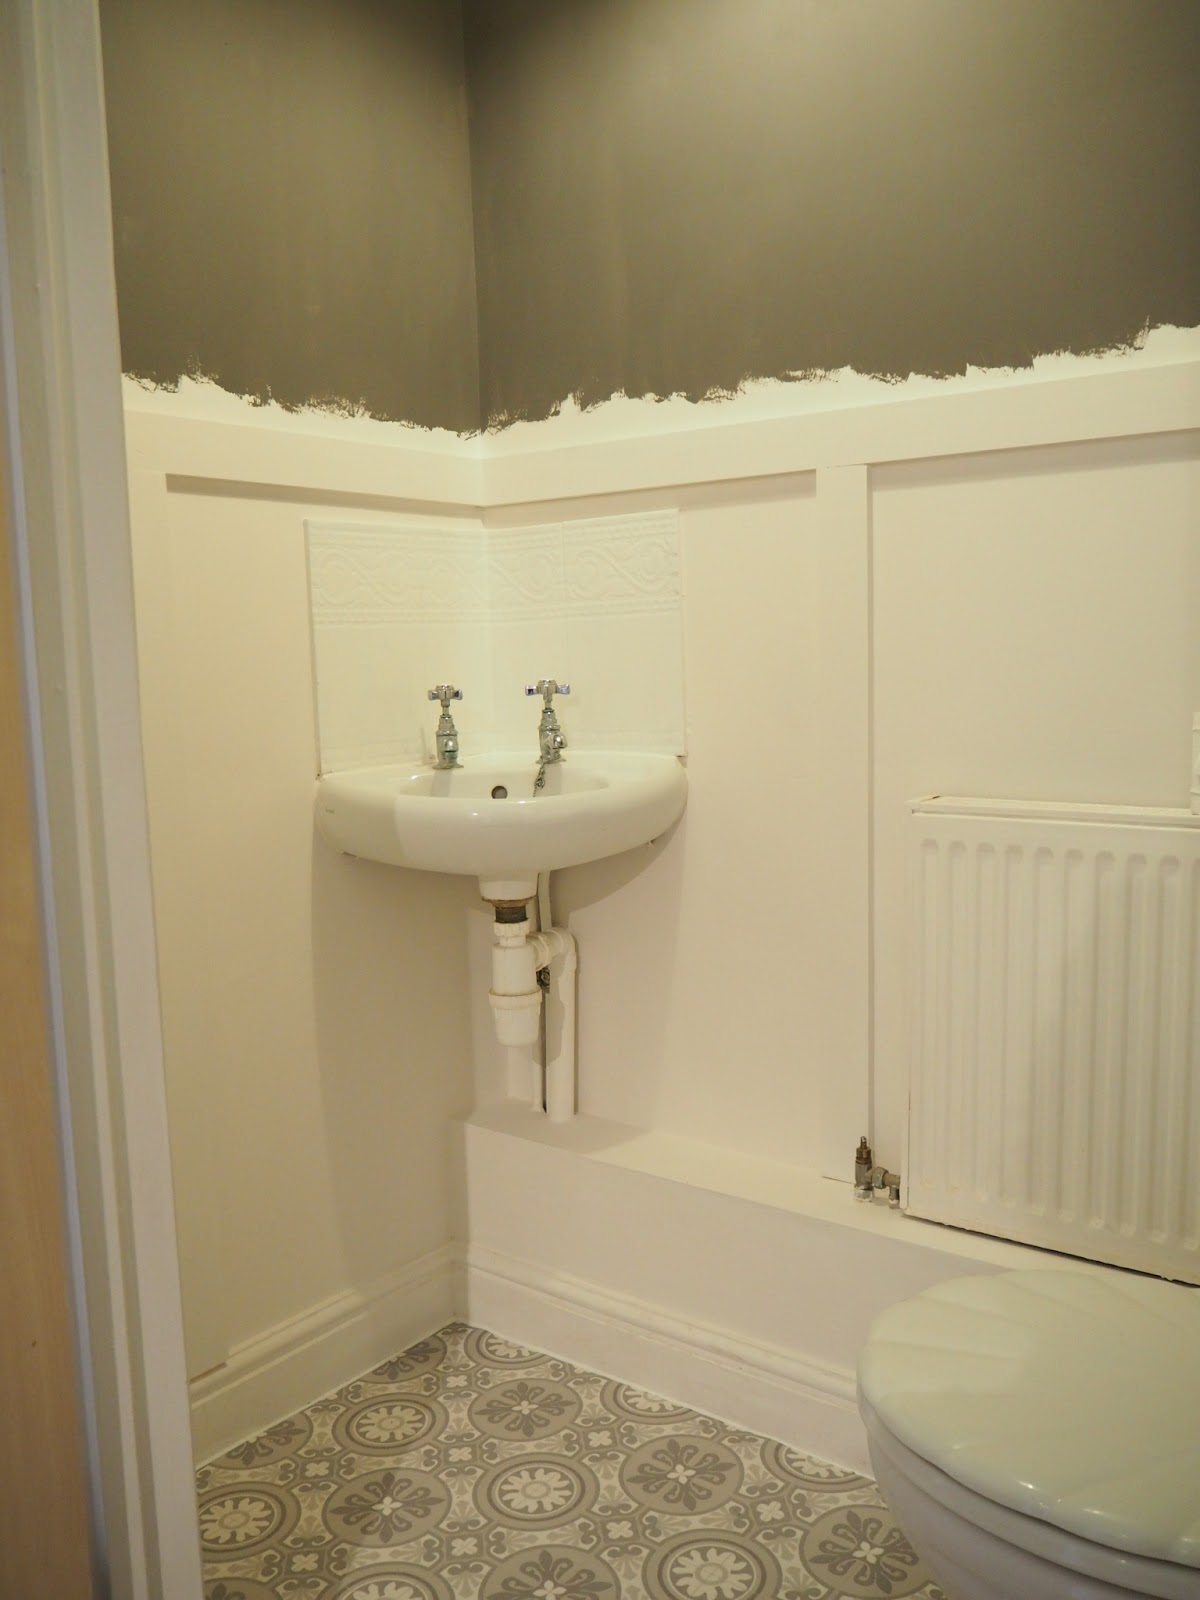 DIY wood panelling and victorian tile-effect vinyl floor transform this downstairs toilet from boring to beautiful. £100 spent on this makeover and no DIY skills needed